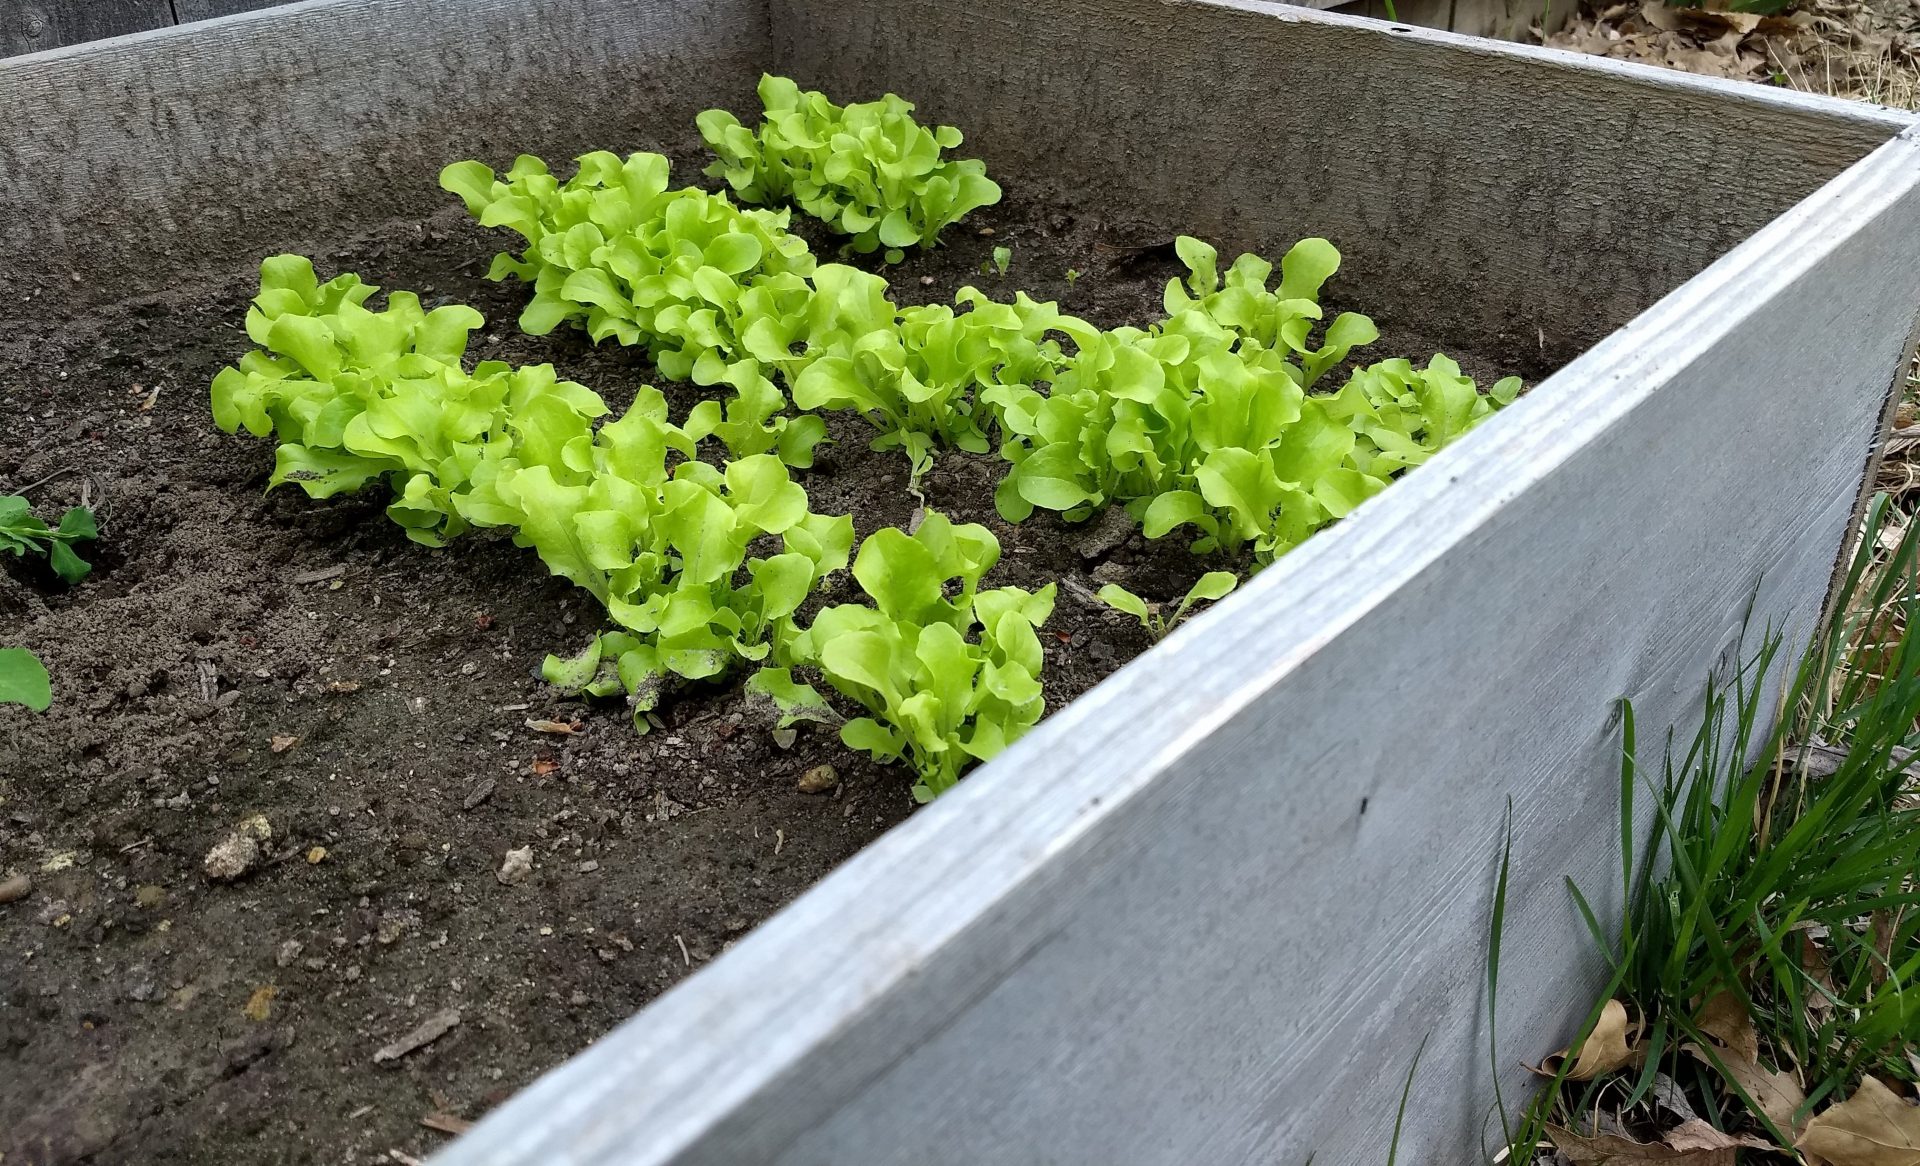 How to Keep Rabbits From Eating Lettuce Plants